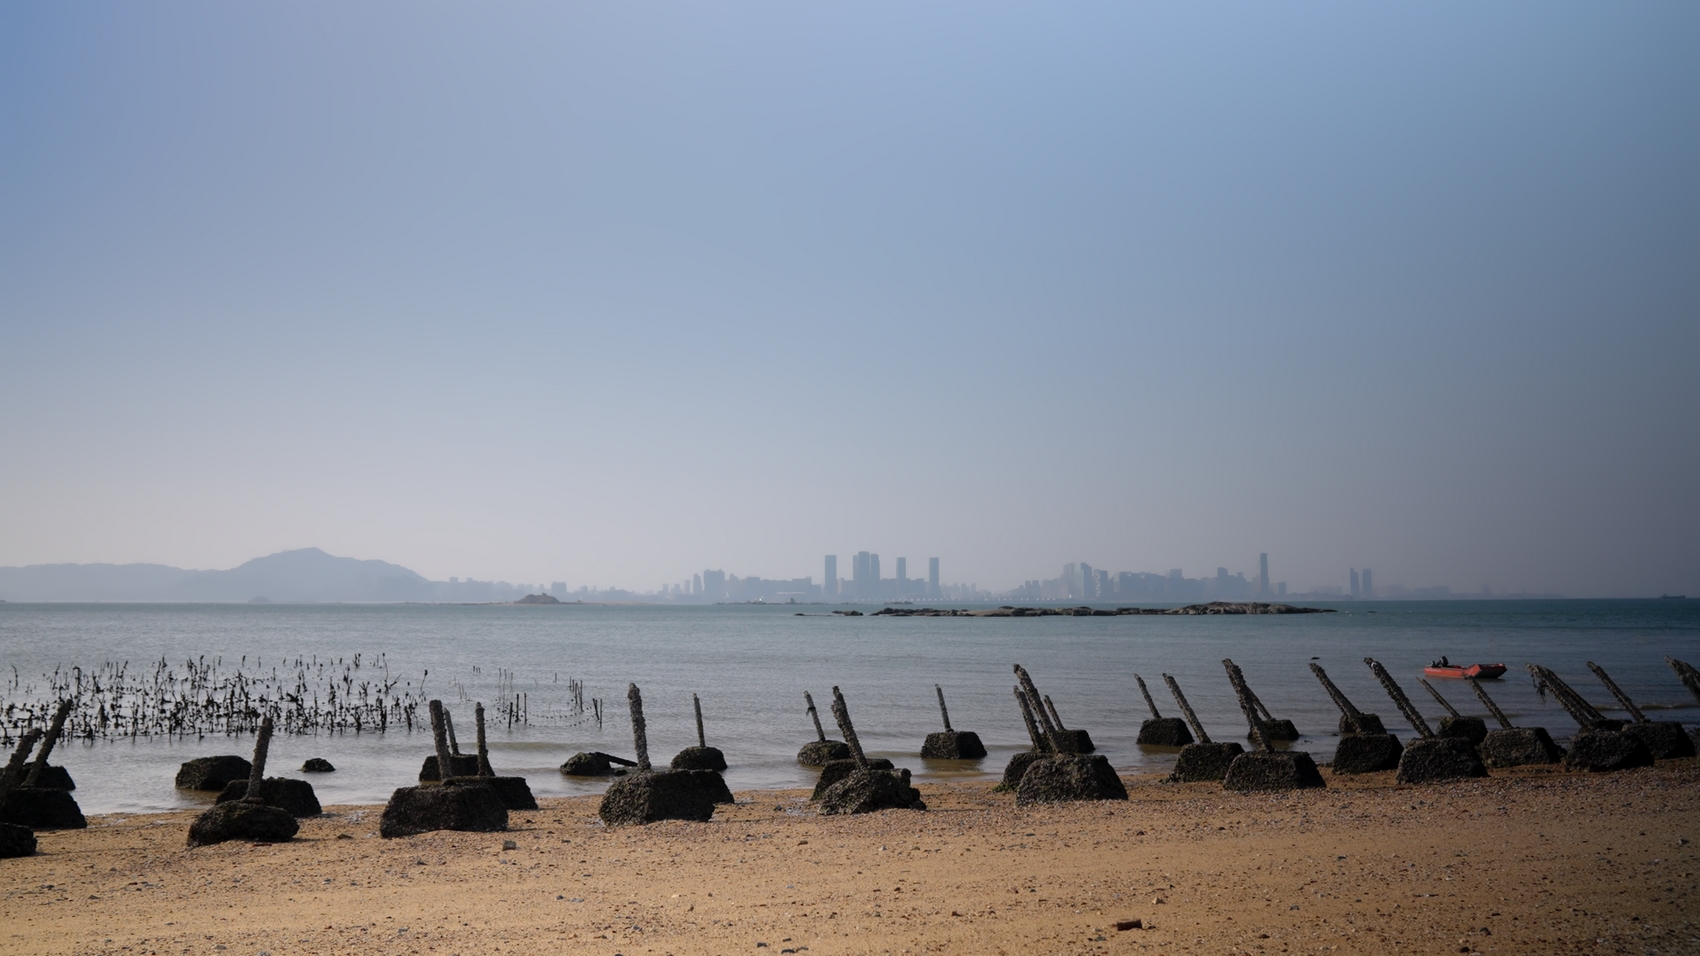 A view of the high-rises in Xiamen City, China, from Little Kinmen Island. The spikes in the foreground are anti-landing spikes setup in the 1950s and 1960s by the Taiwanese military to deter Chinese military vessels from landing in Kinmen. Photo: Island in Between